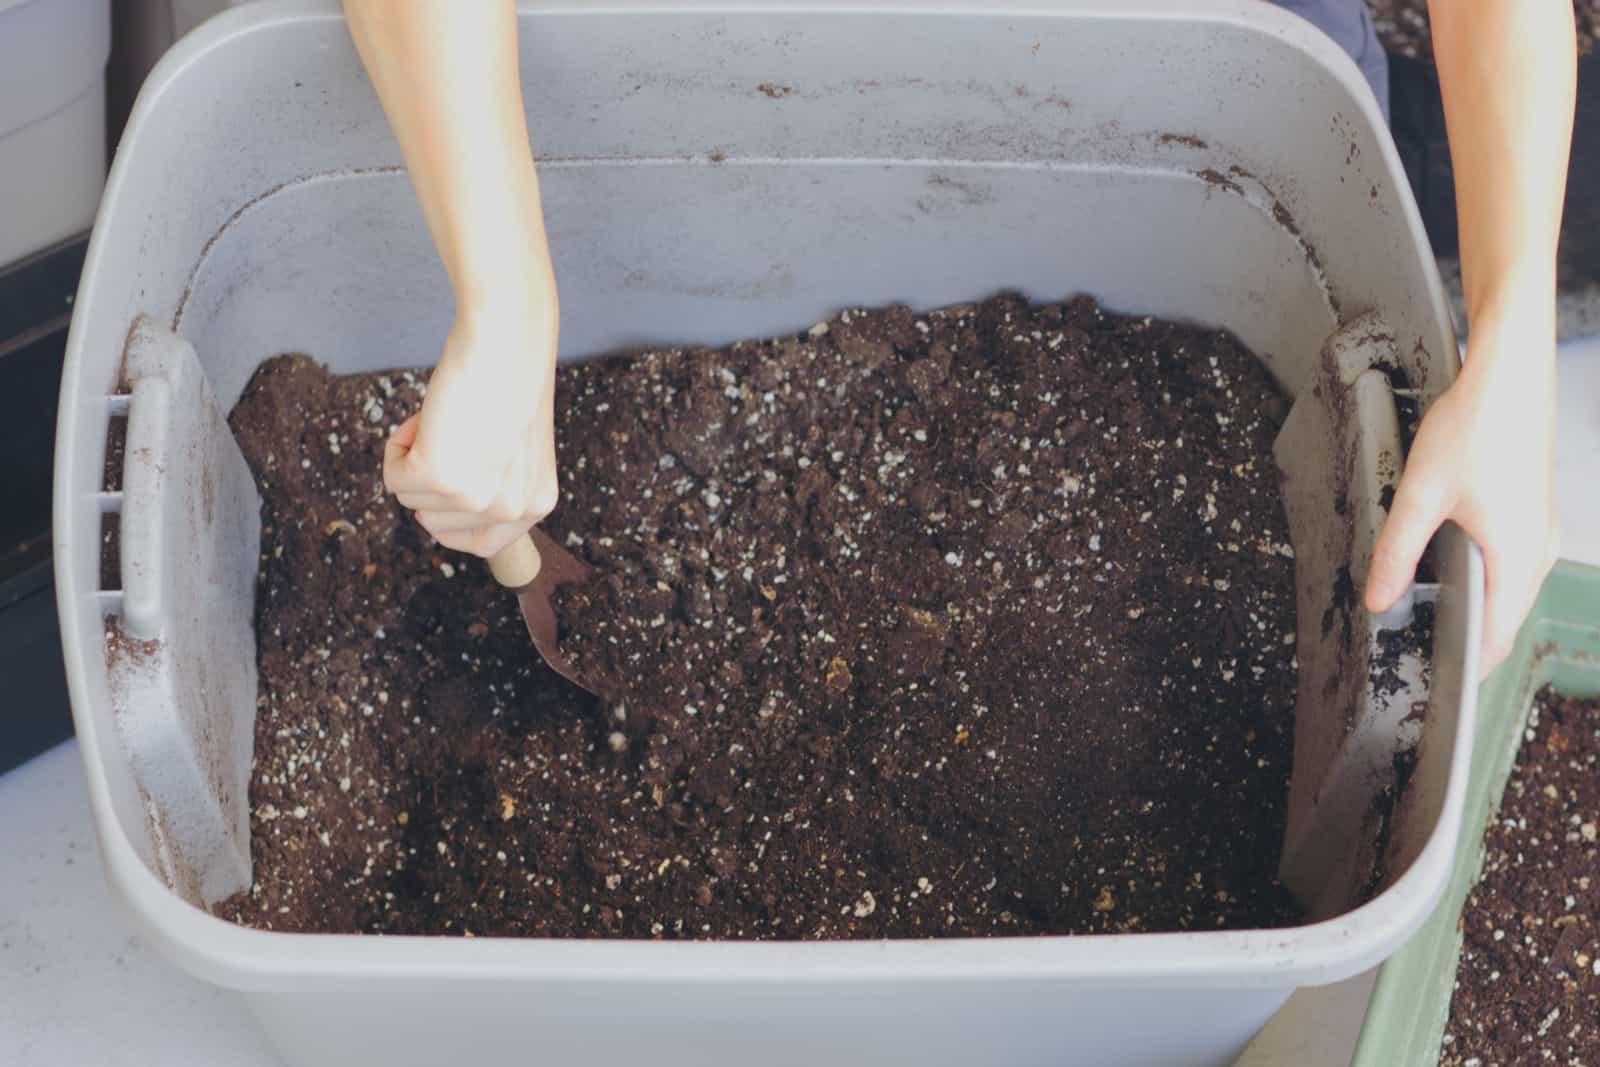 Home made compost and soil in a container